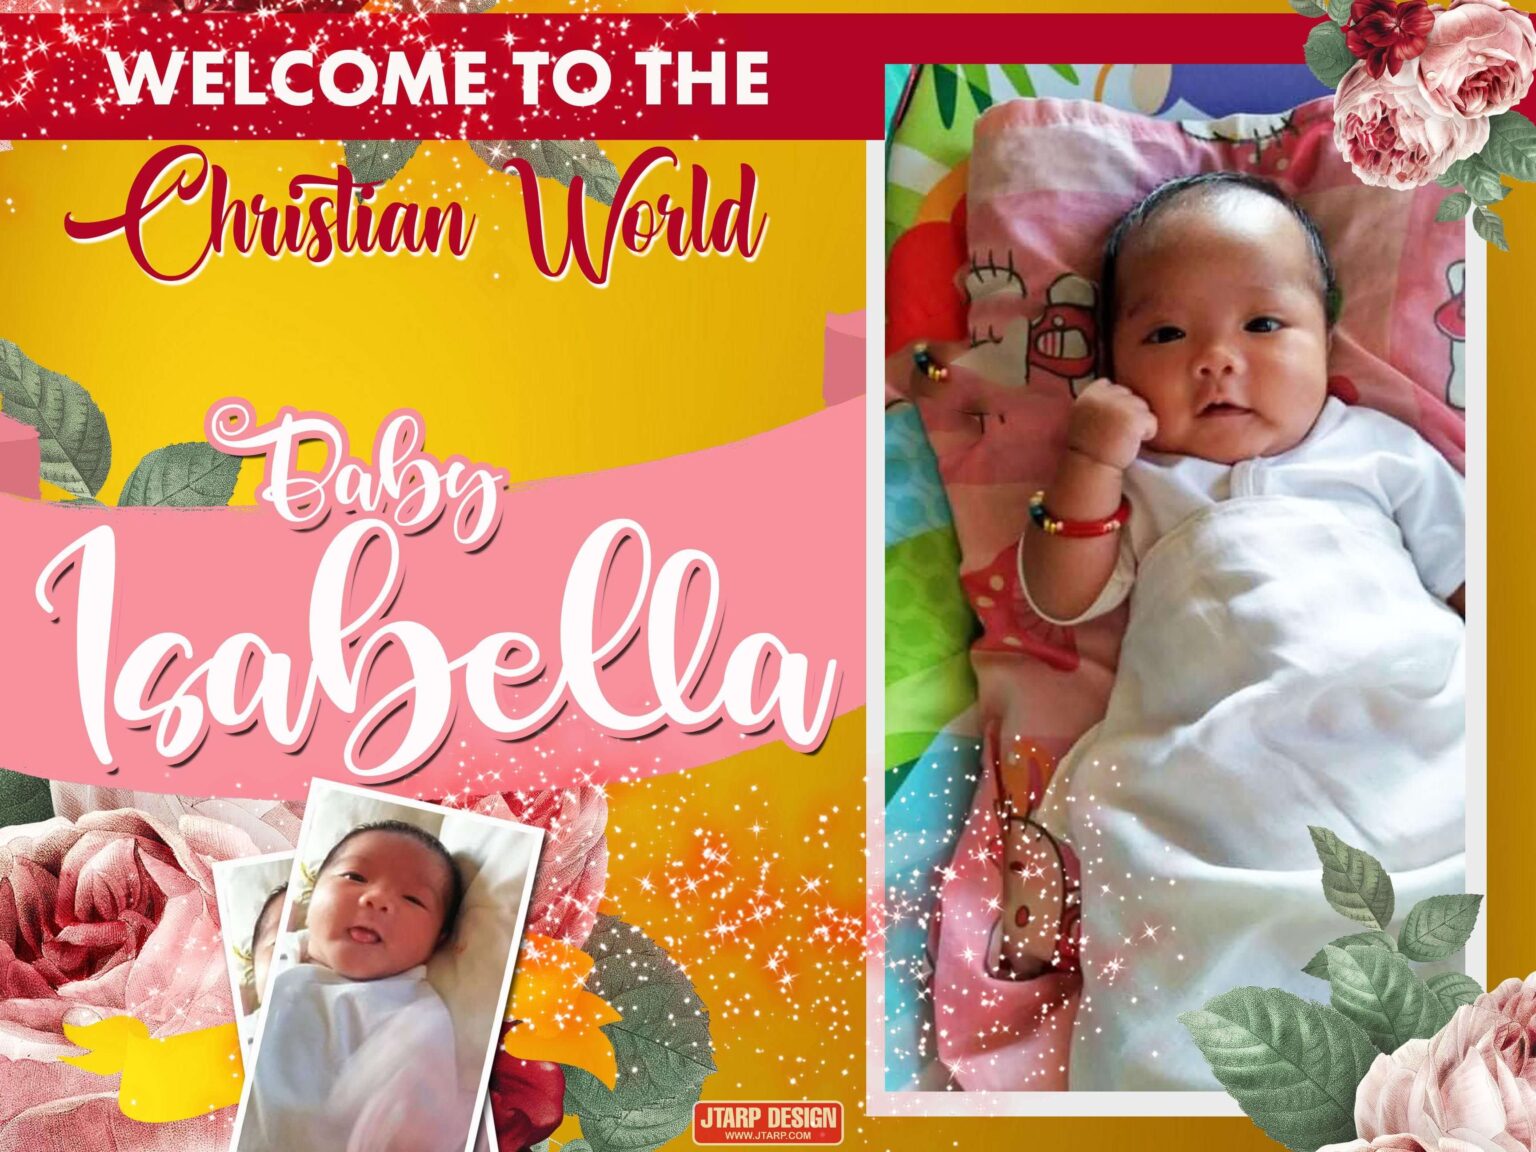 4x3 Welcome to the Christian World Baby Isabella